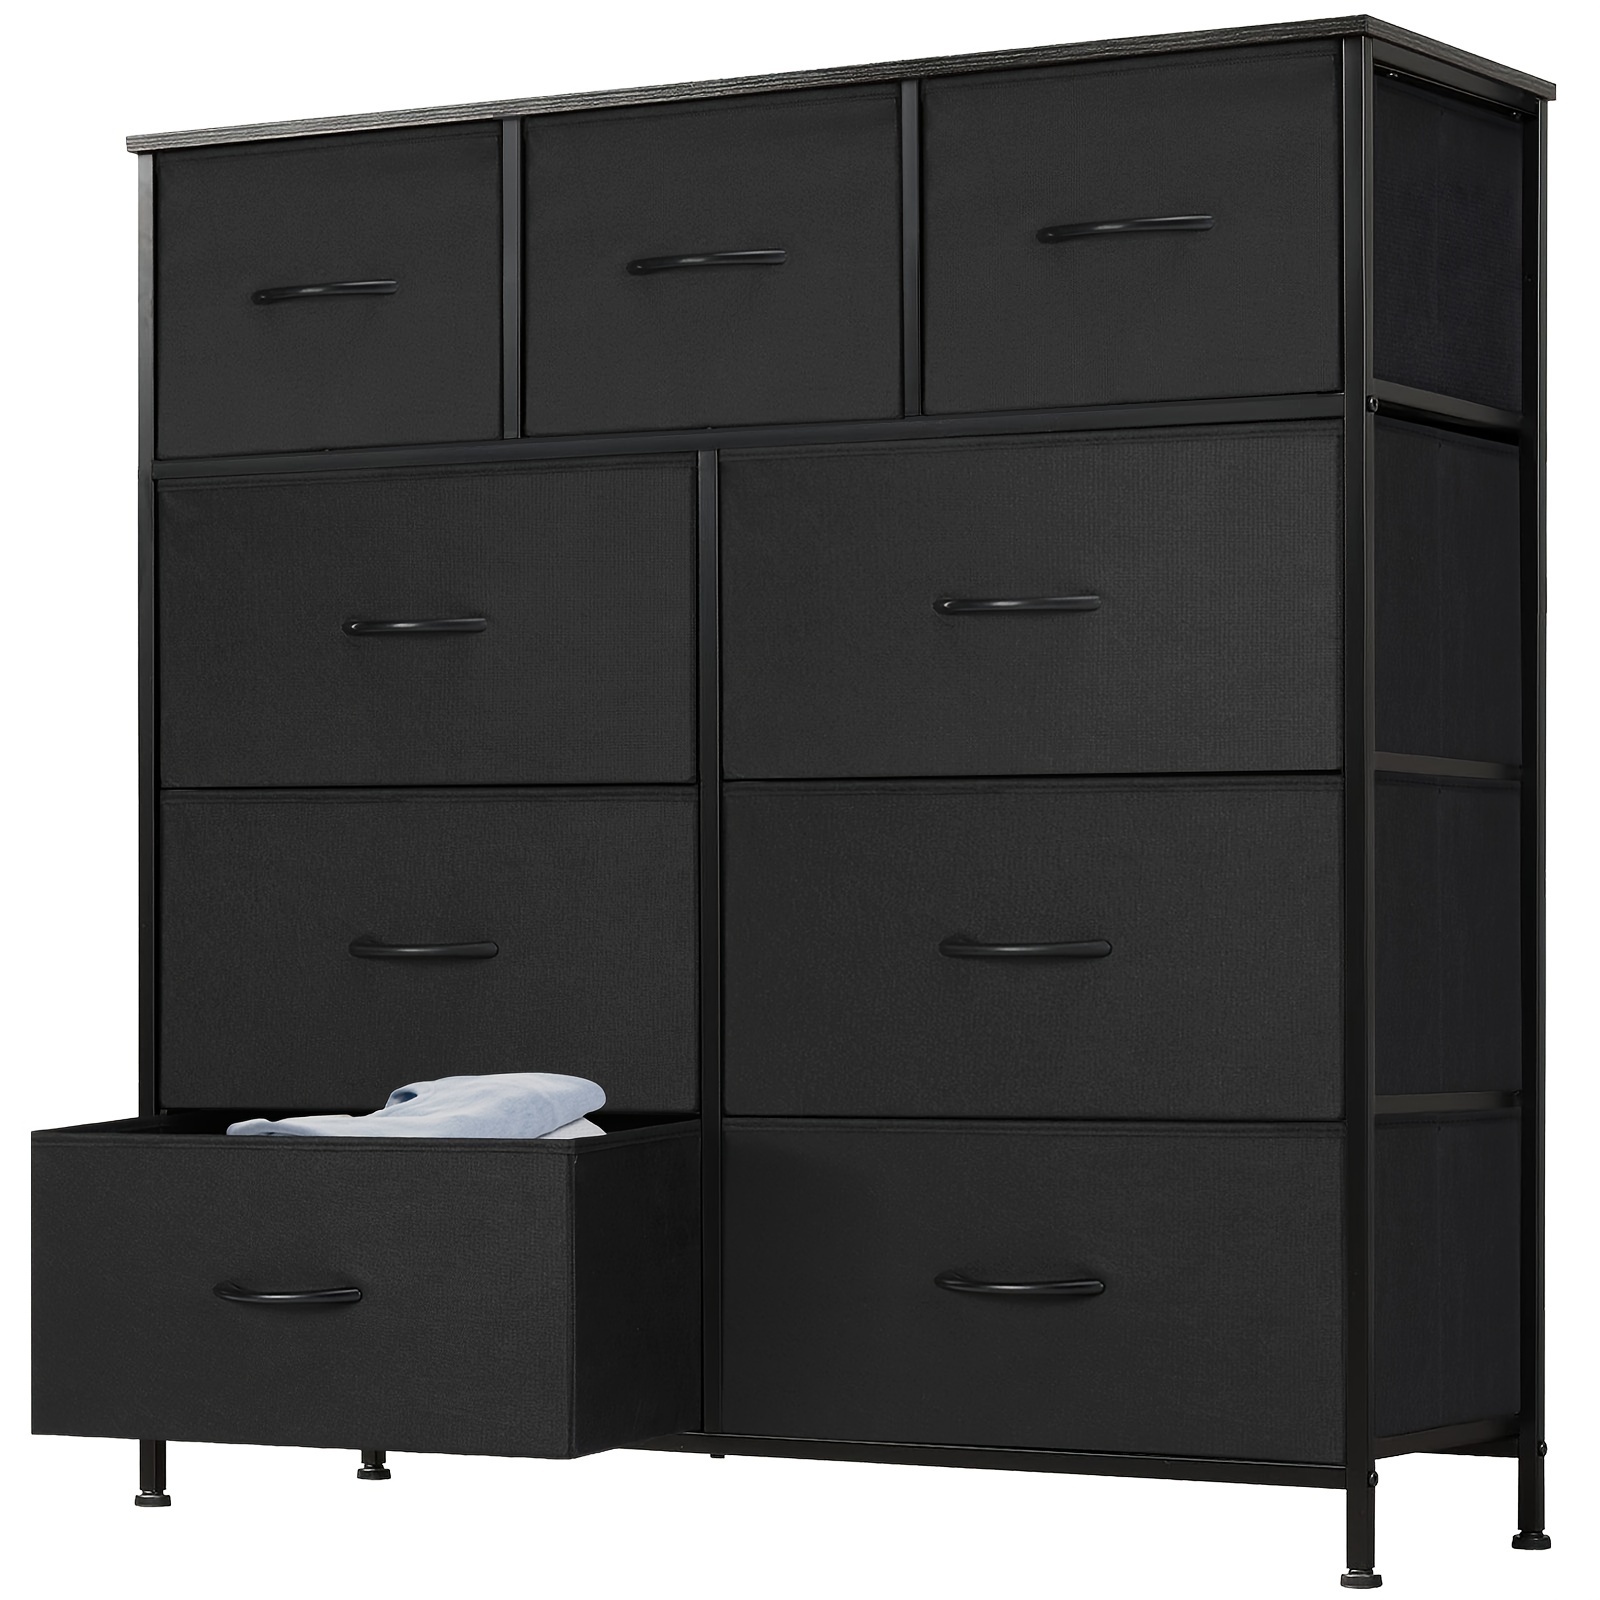 

Dumos Chest Of Drawers Fabric With 9 Drawers Sideboard Multi-purpose Cupboard Drawer Cabinet With Metal Frame Drawers Made Of Fabric, For Bedroom, Living Room (black)